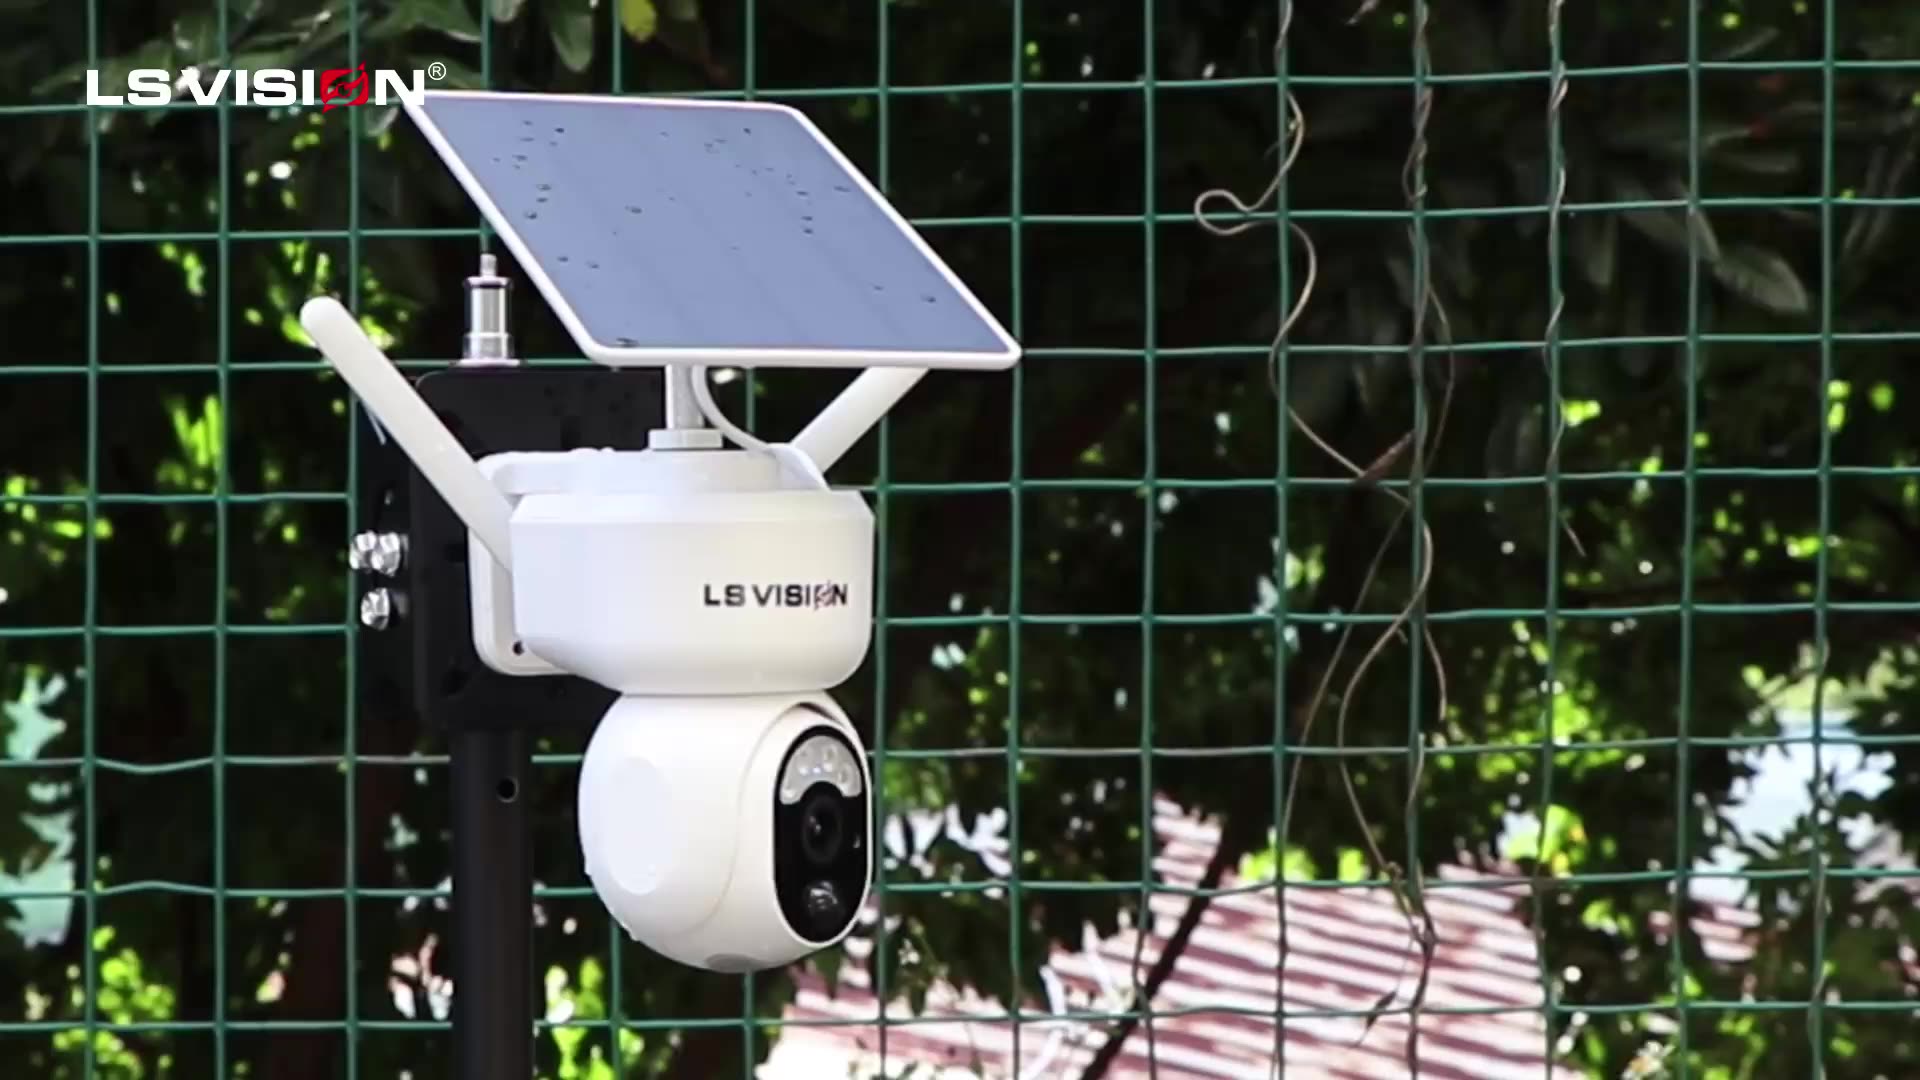 LS VISION 1080P 3.5W LOW power solar camera with Solar panels motion detection IP66 waterproof network camera